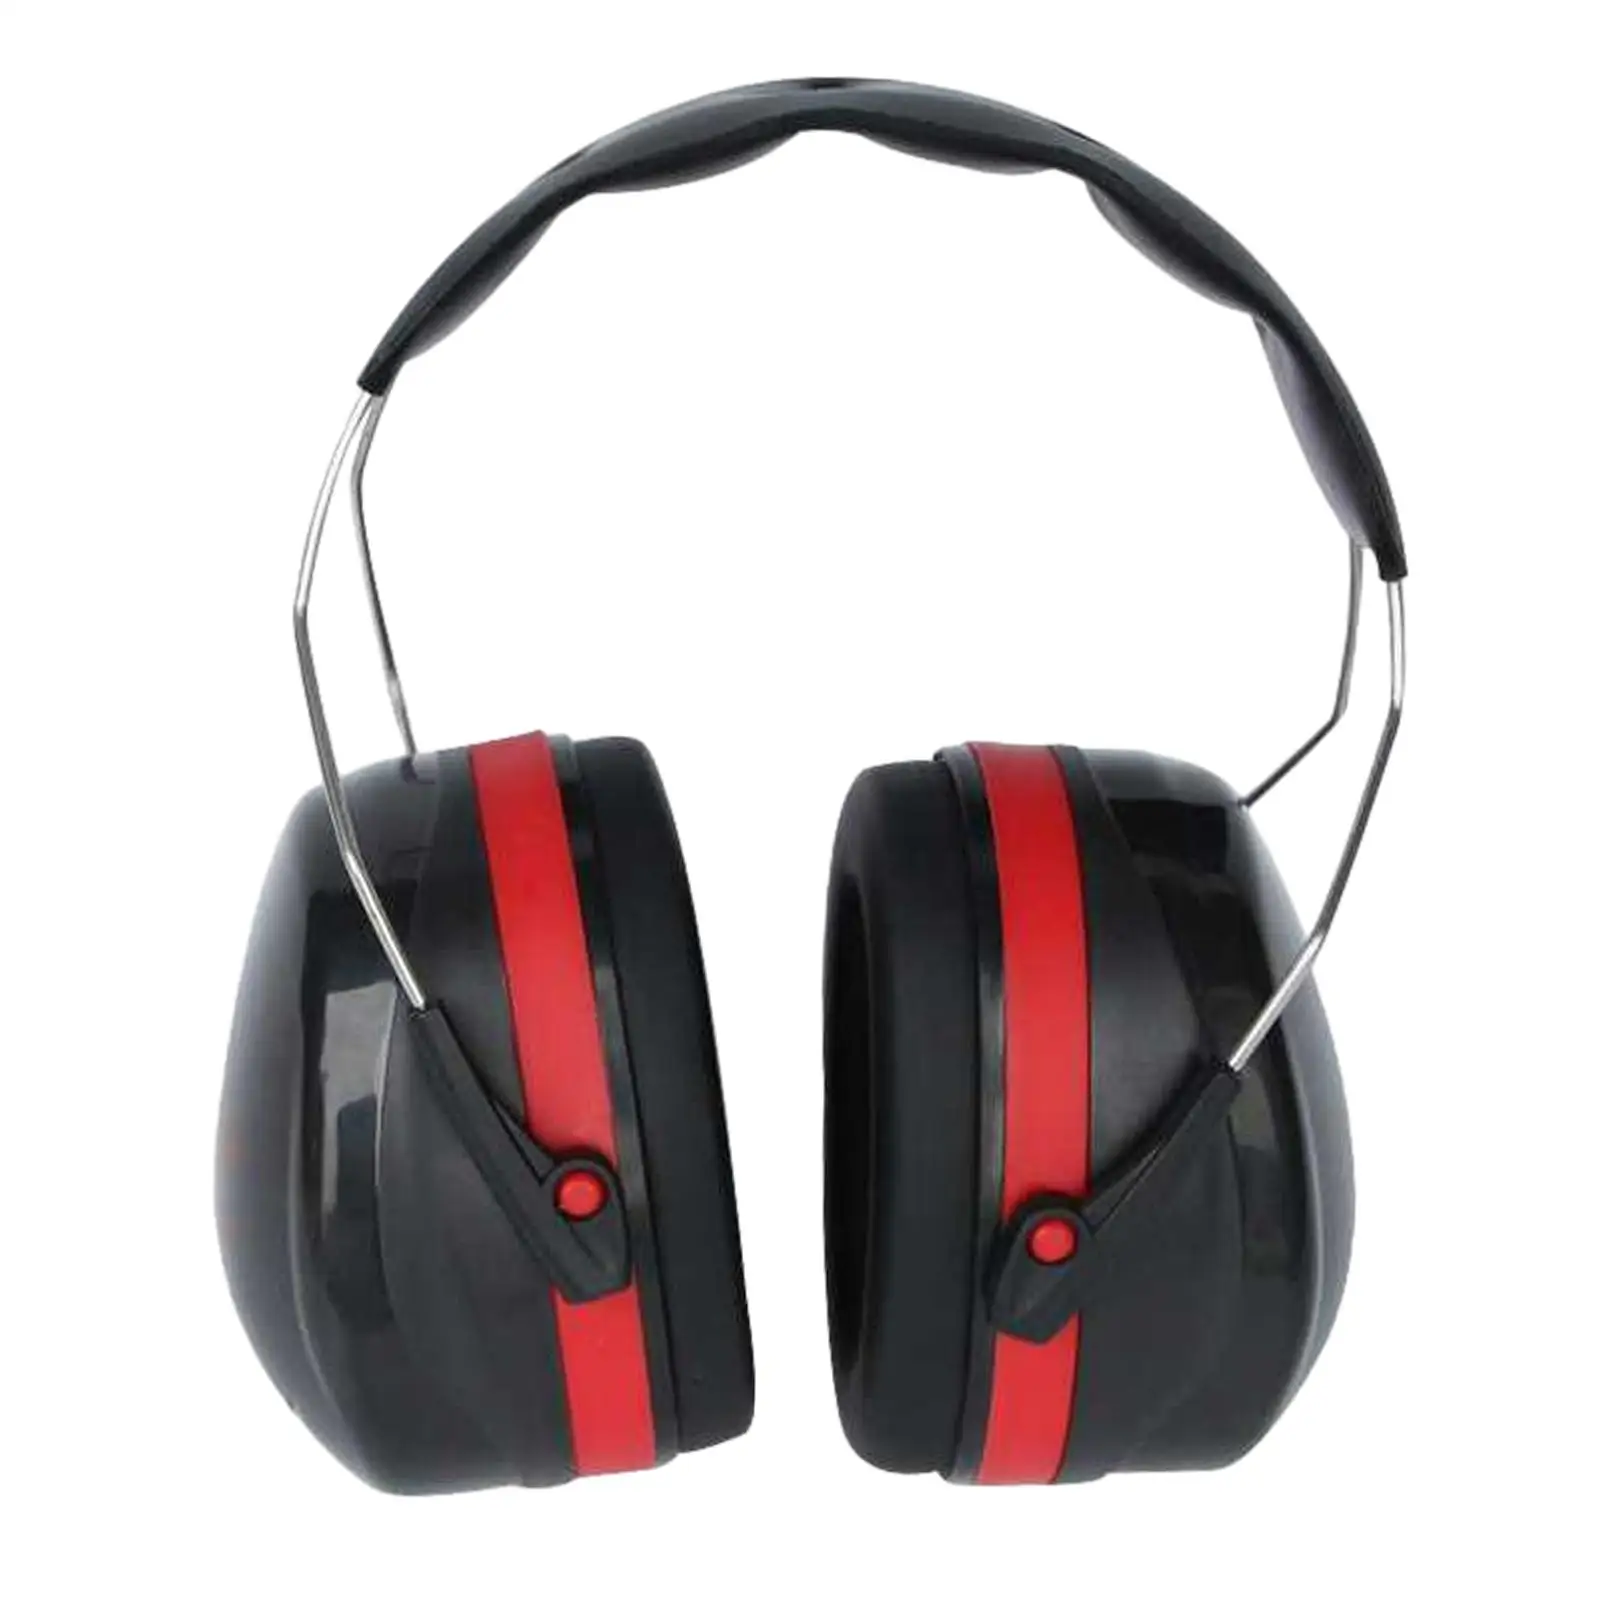 Noise Reduction Headphones Mute Soundproof No Pressure to Wear Safety Ear Muffs for Woodwork Sleeping Mowing Lawn Teens